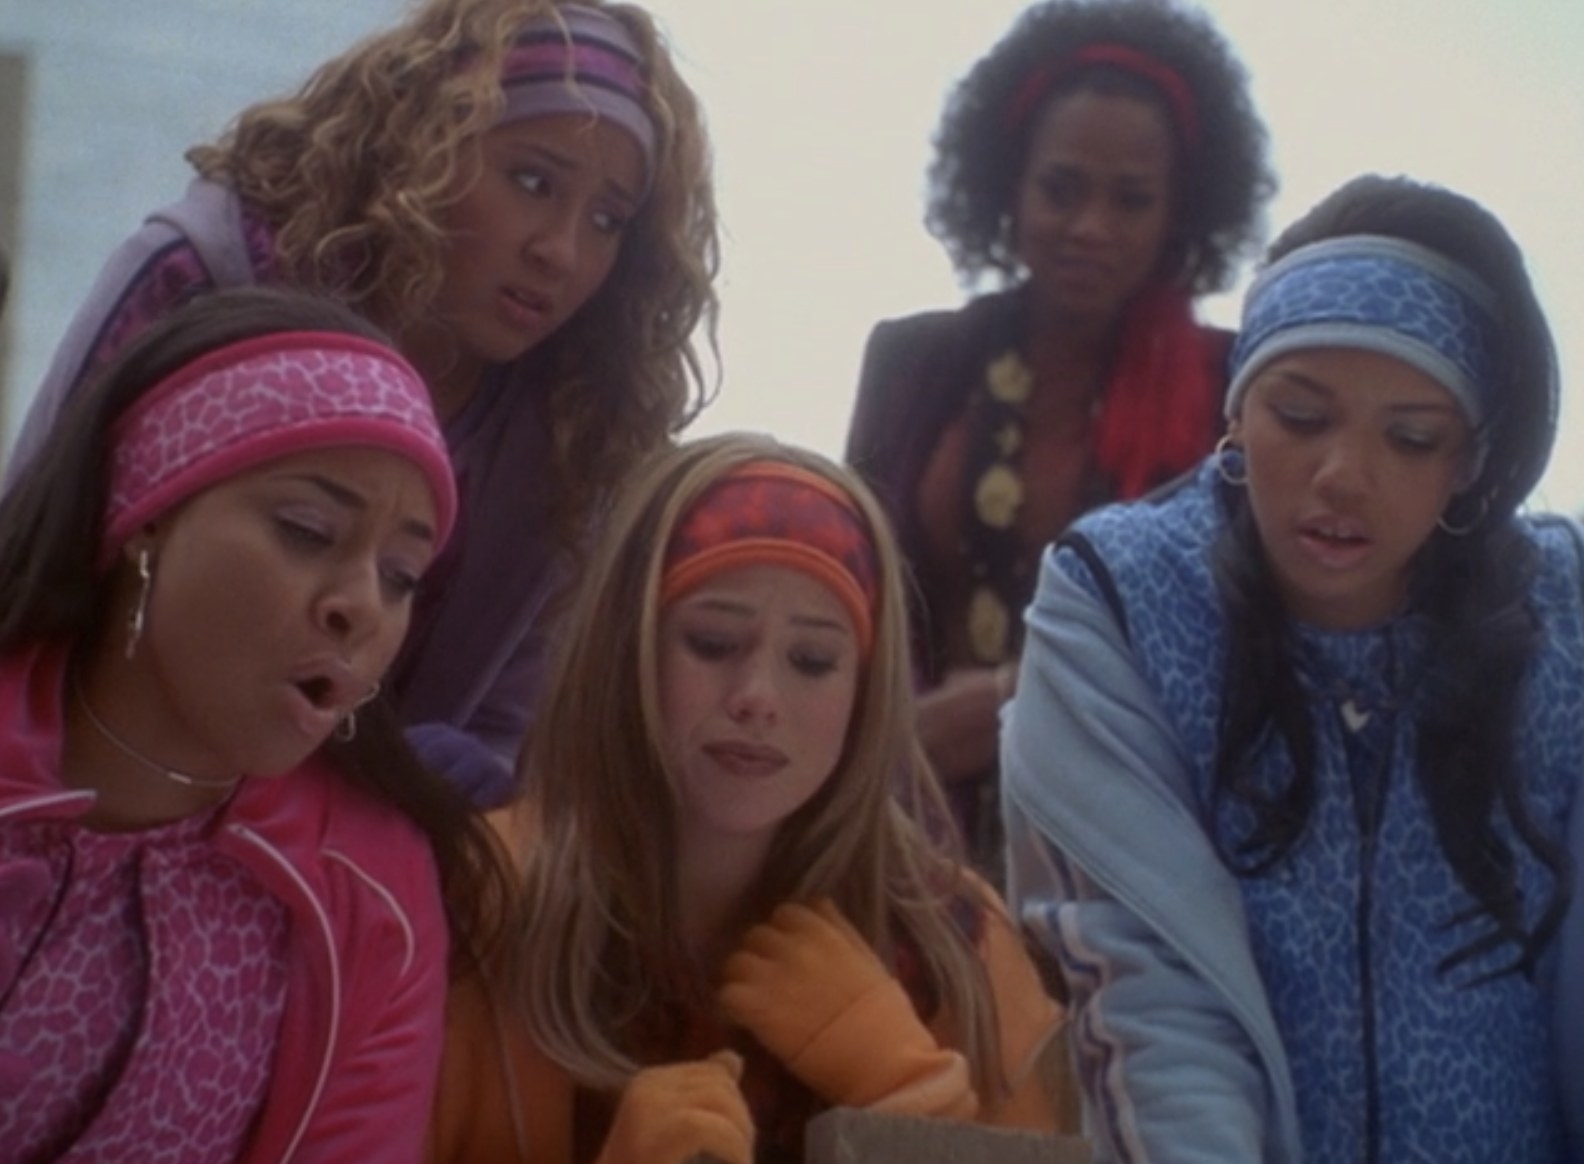 The Cheetah Girls gathered over a manhole singing to Toto